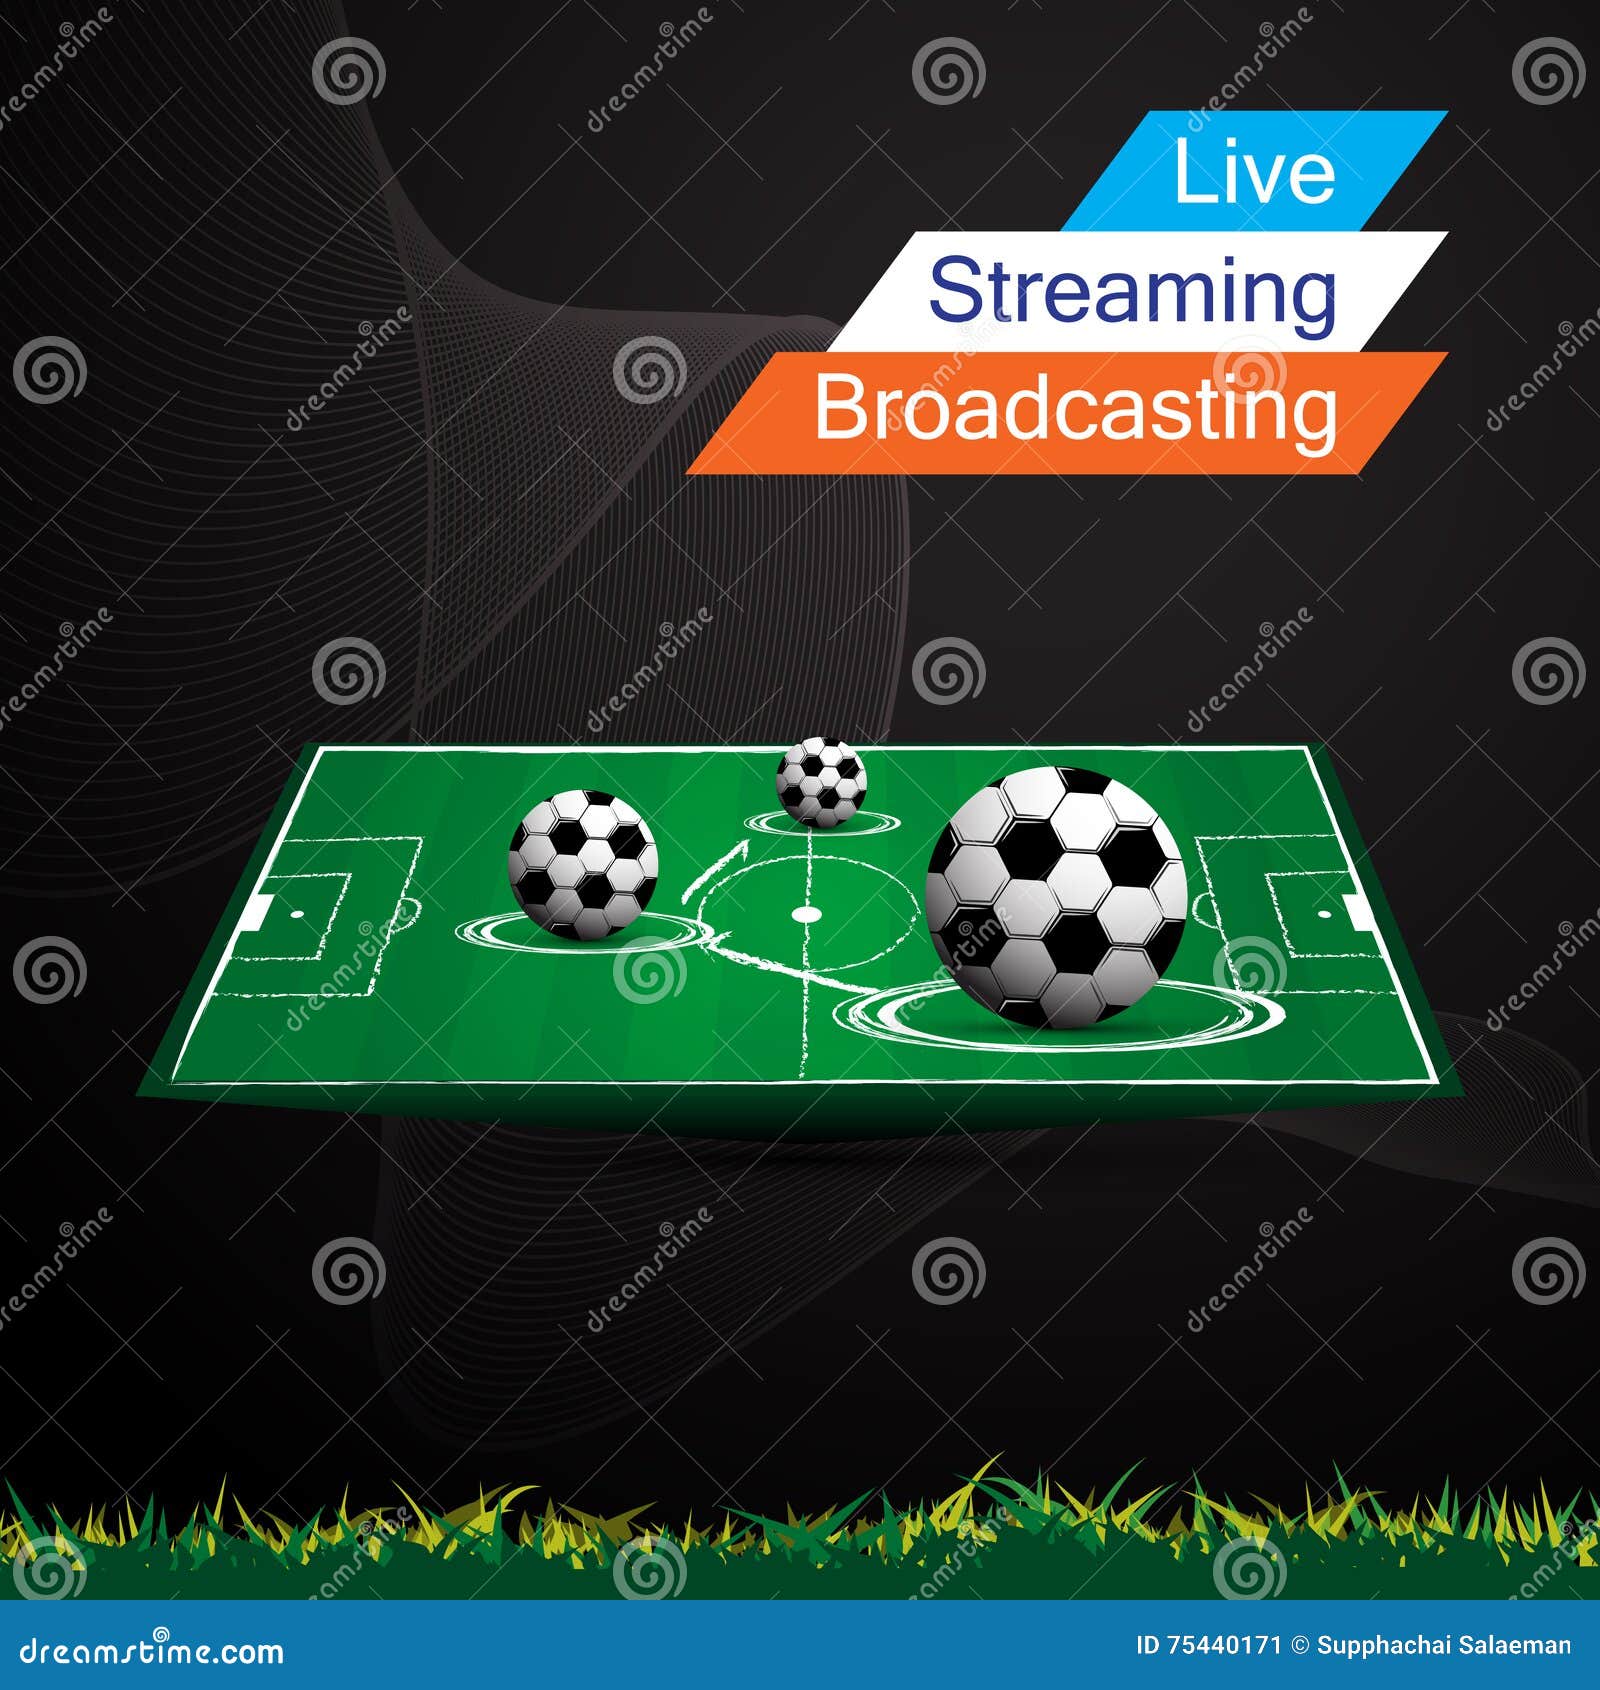 Abstract Banner Football Soccer Live Stream Broadcasting Design Stock Vector